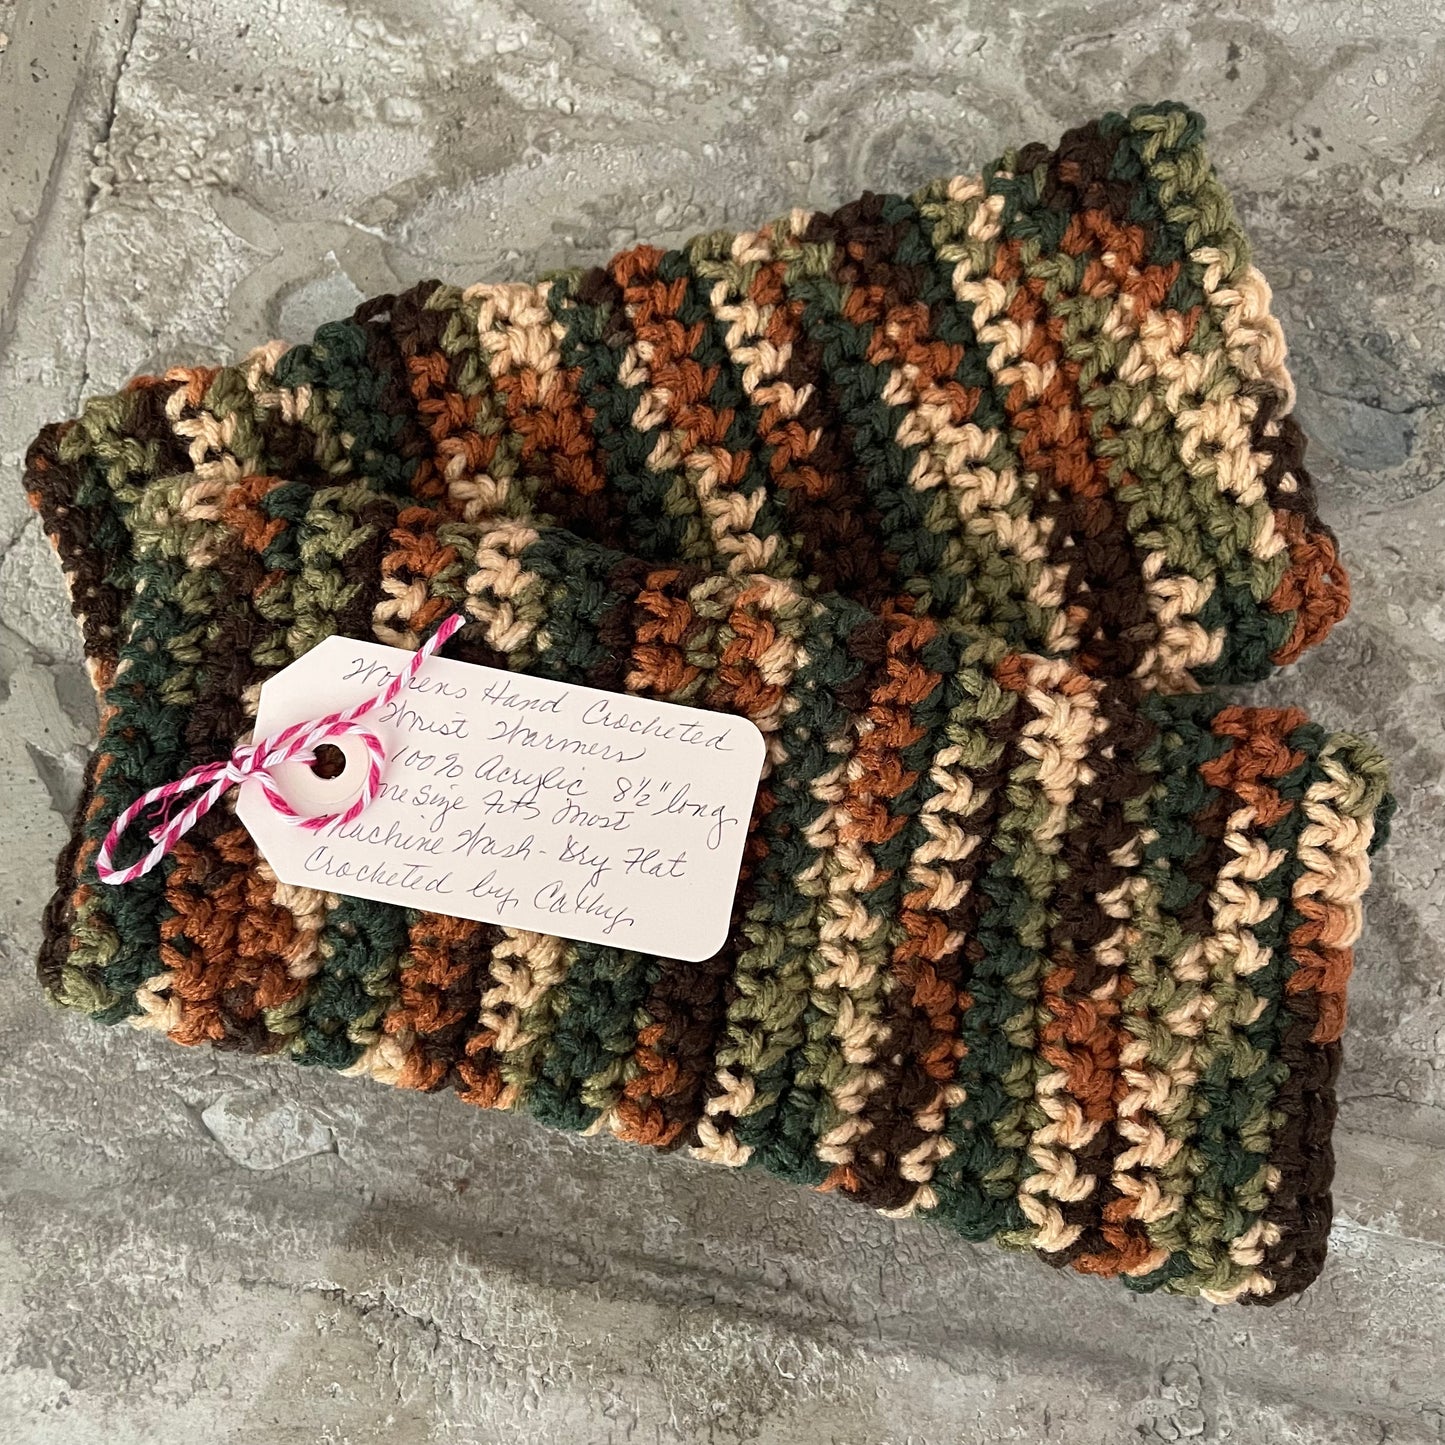 Extra Warm Brown & Green Camouflage Texting Fingerless Gloves Crochet Knit Fall Winter Gaming Tech Wrist Warmers